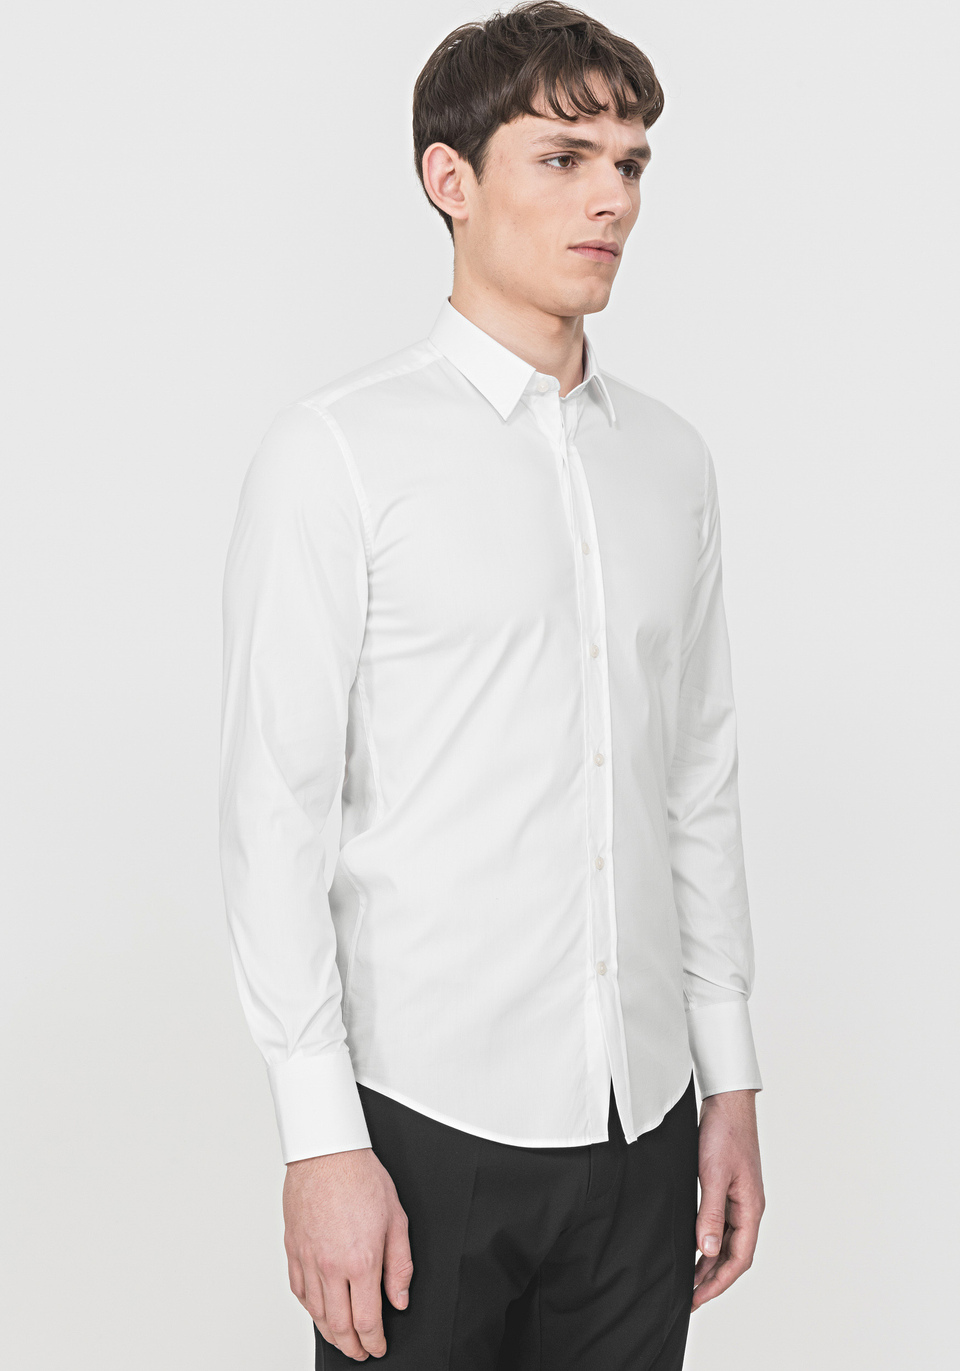 Super slim-fit shirt with exposed button placket - Antony Morato Online Shop